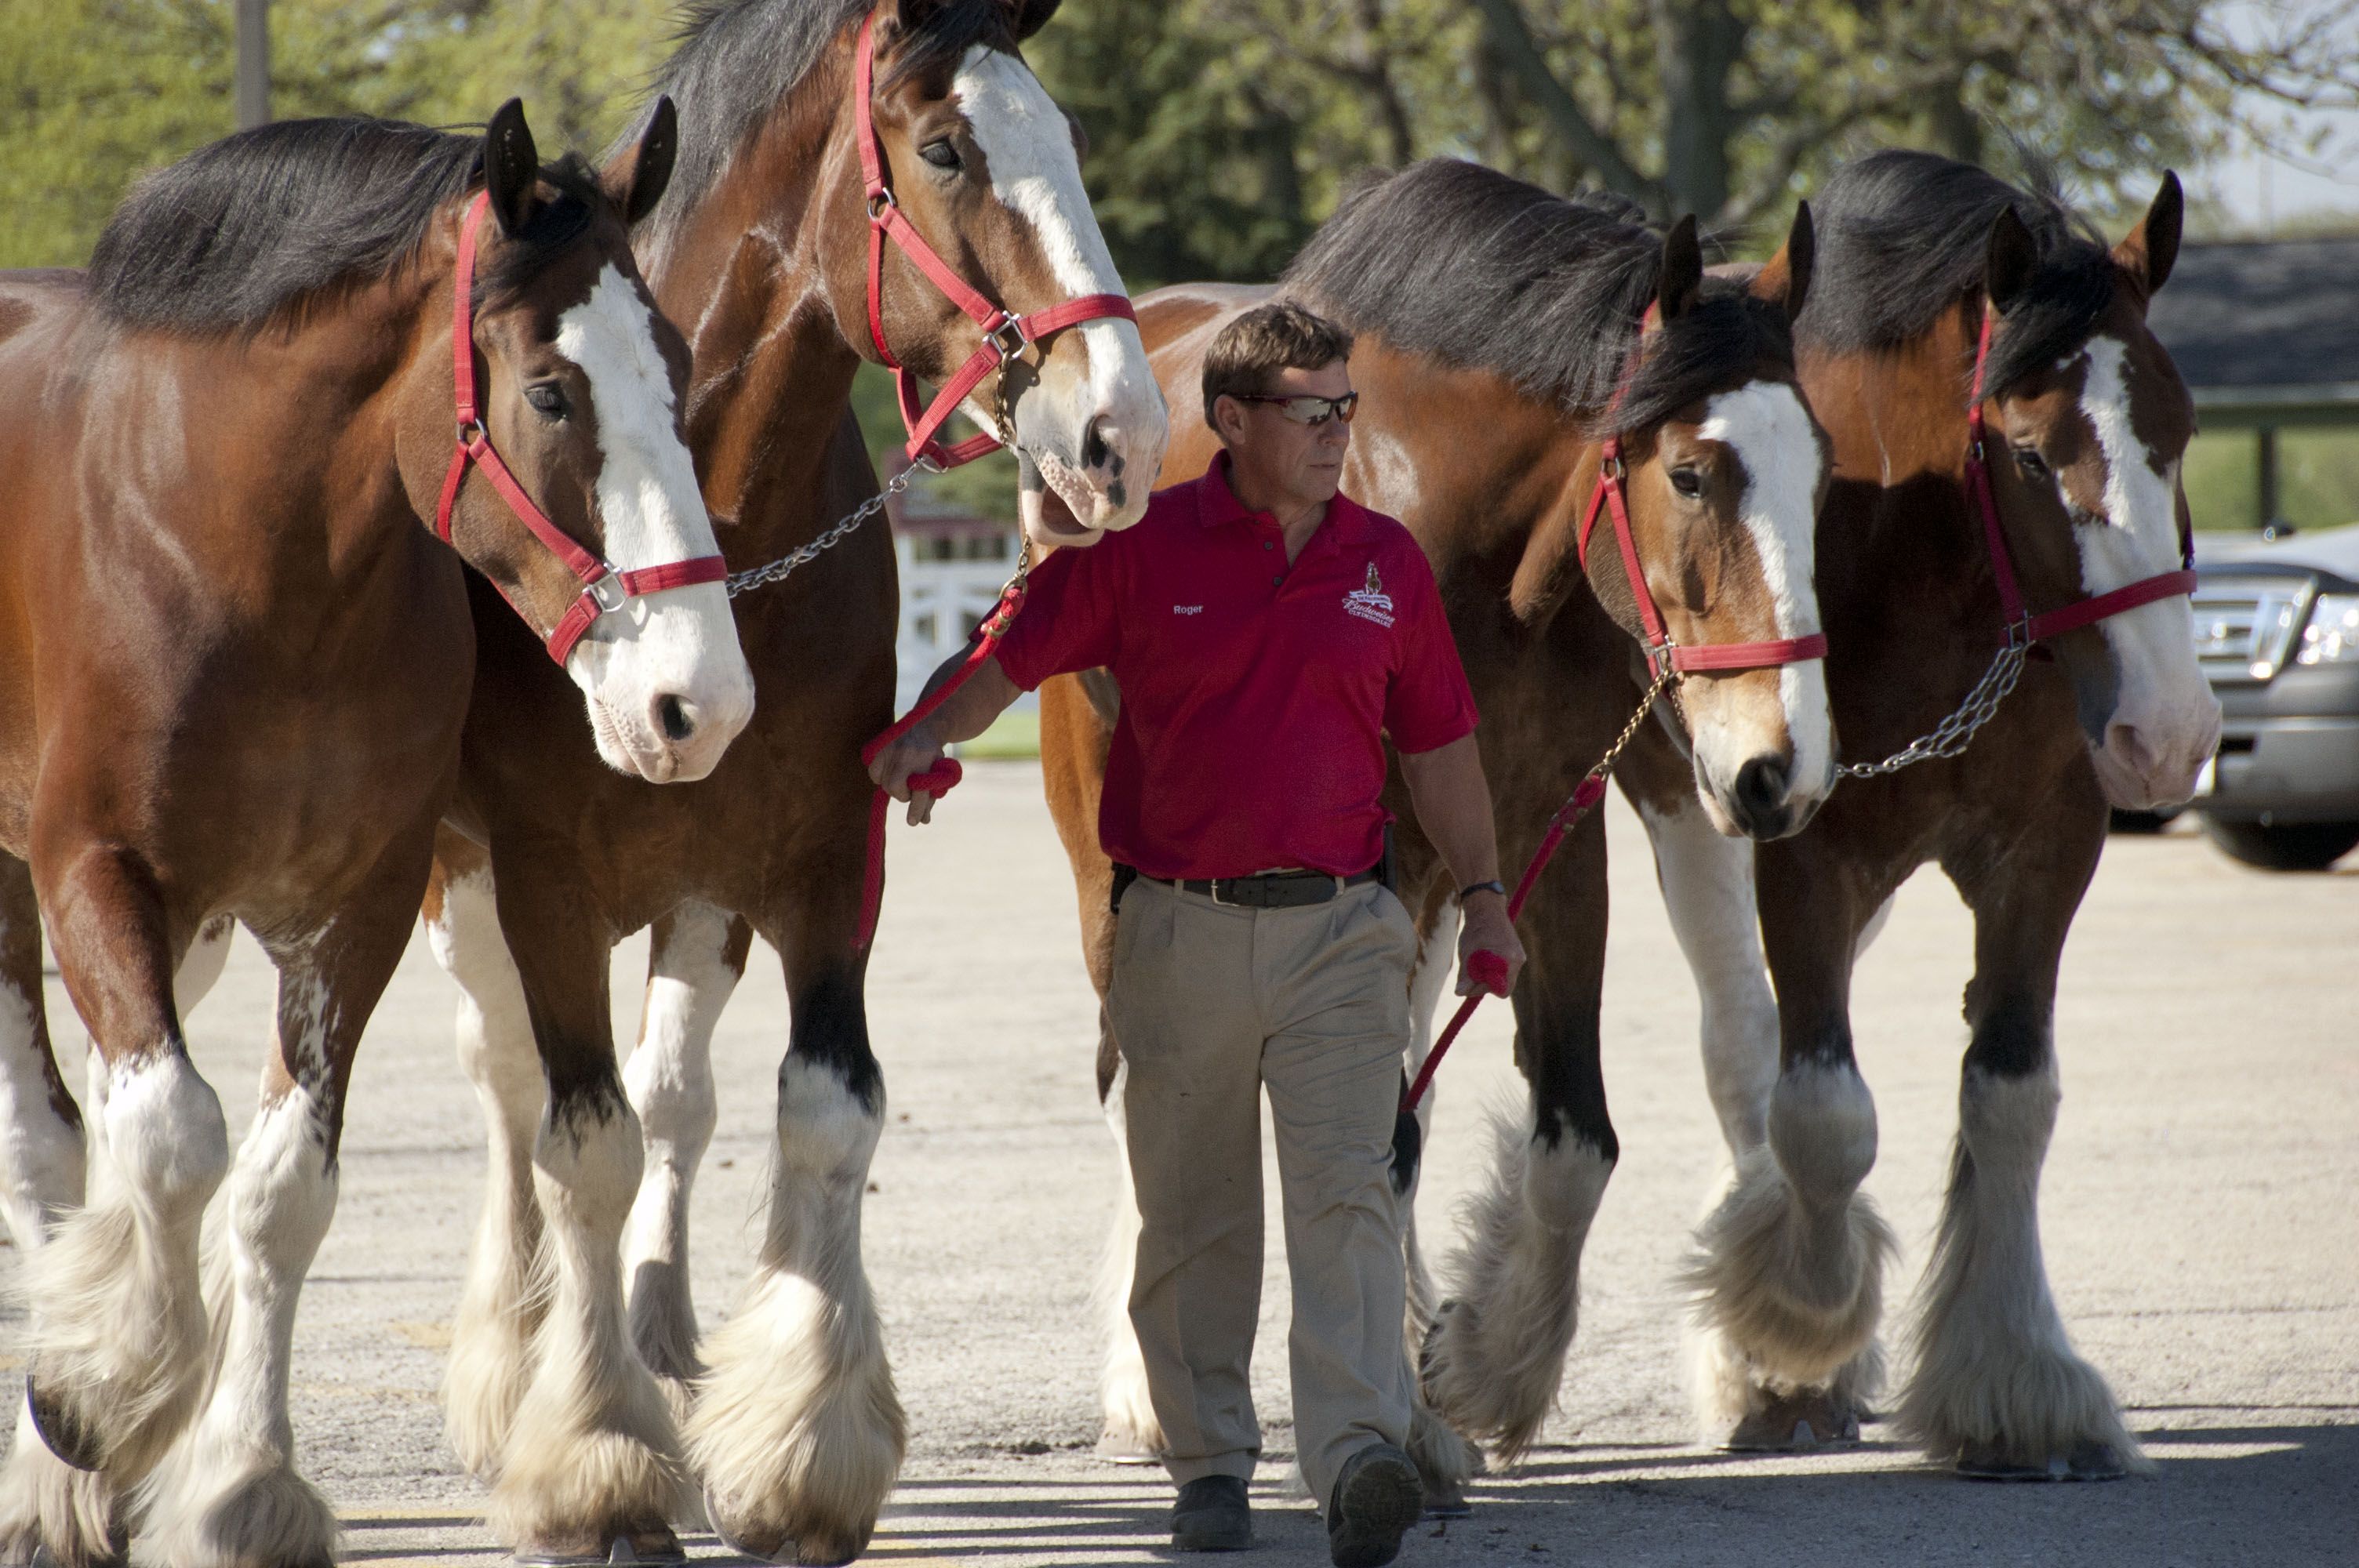 Budweiser Clydesdales at Lambs Farm | Events | Pinterest | Horse